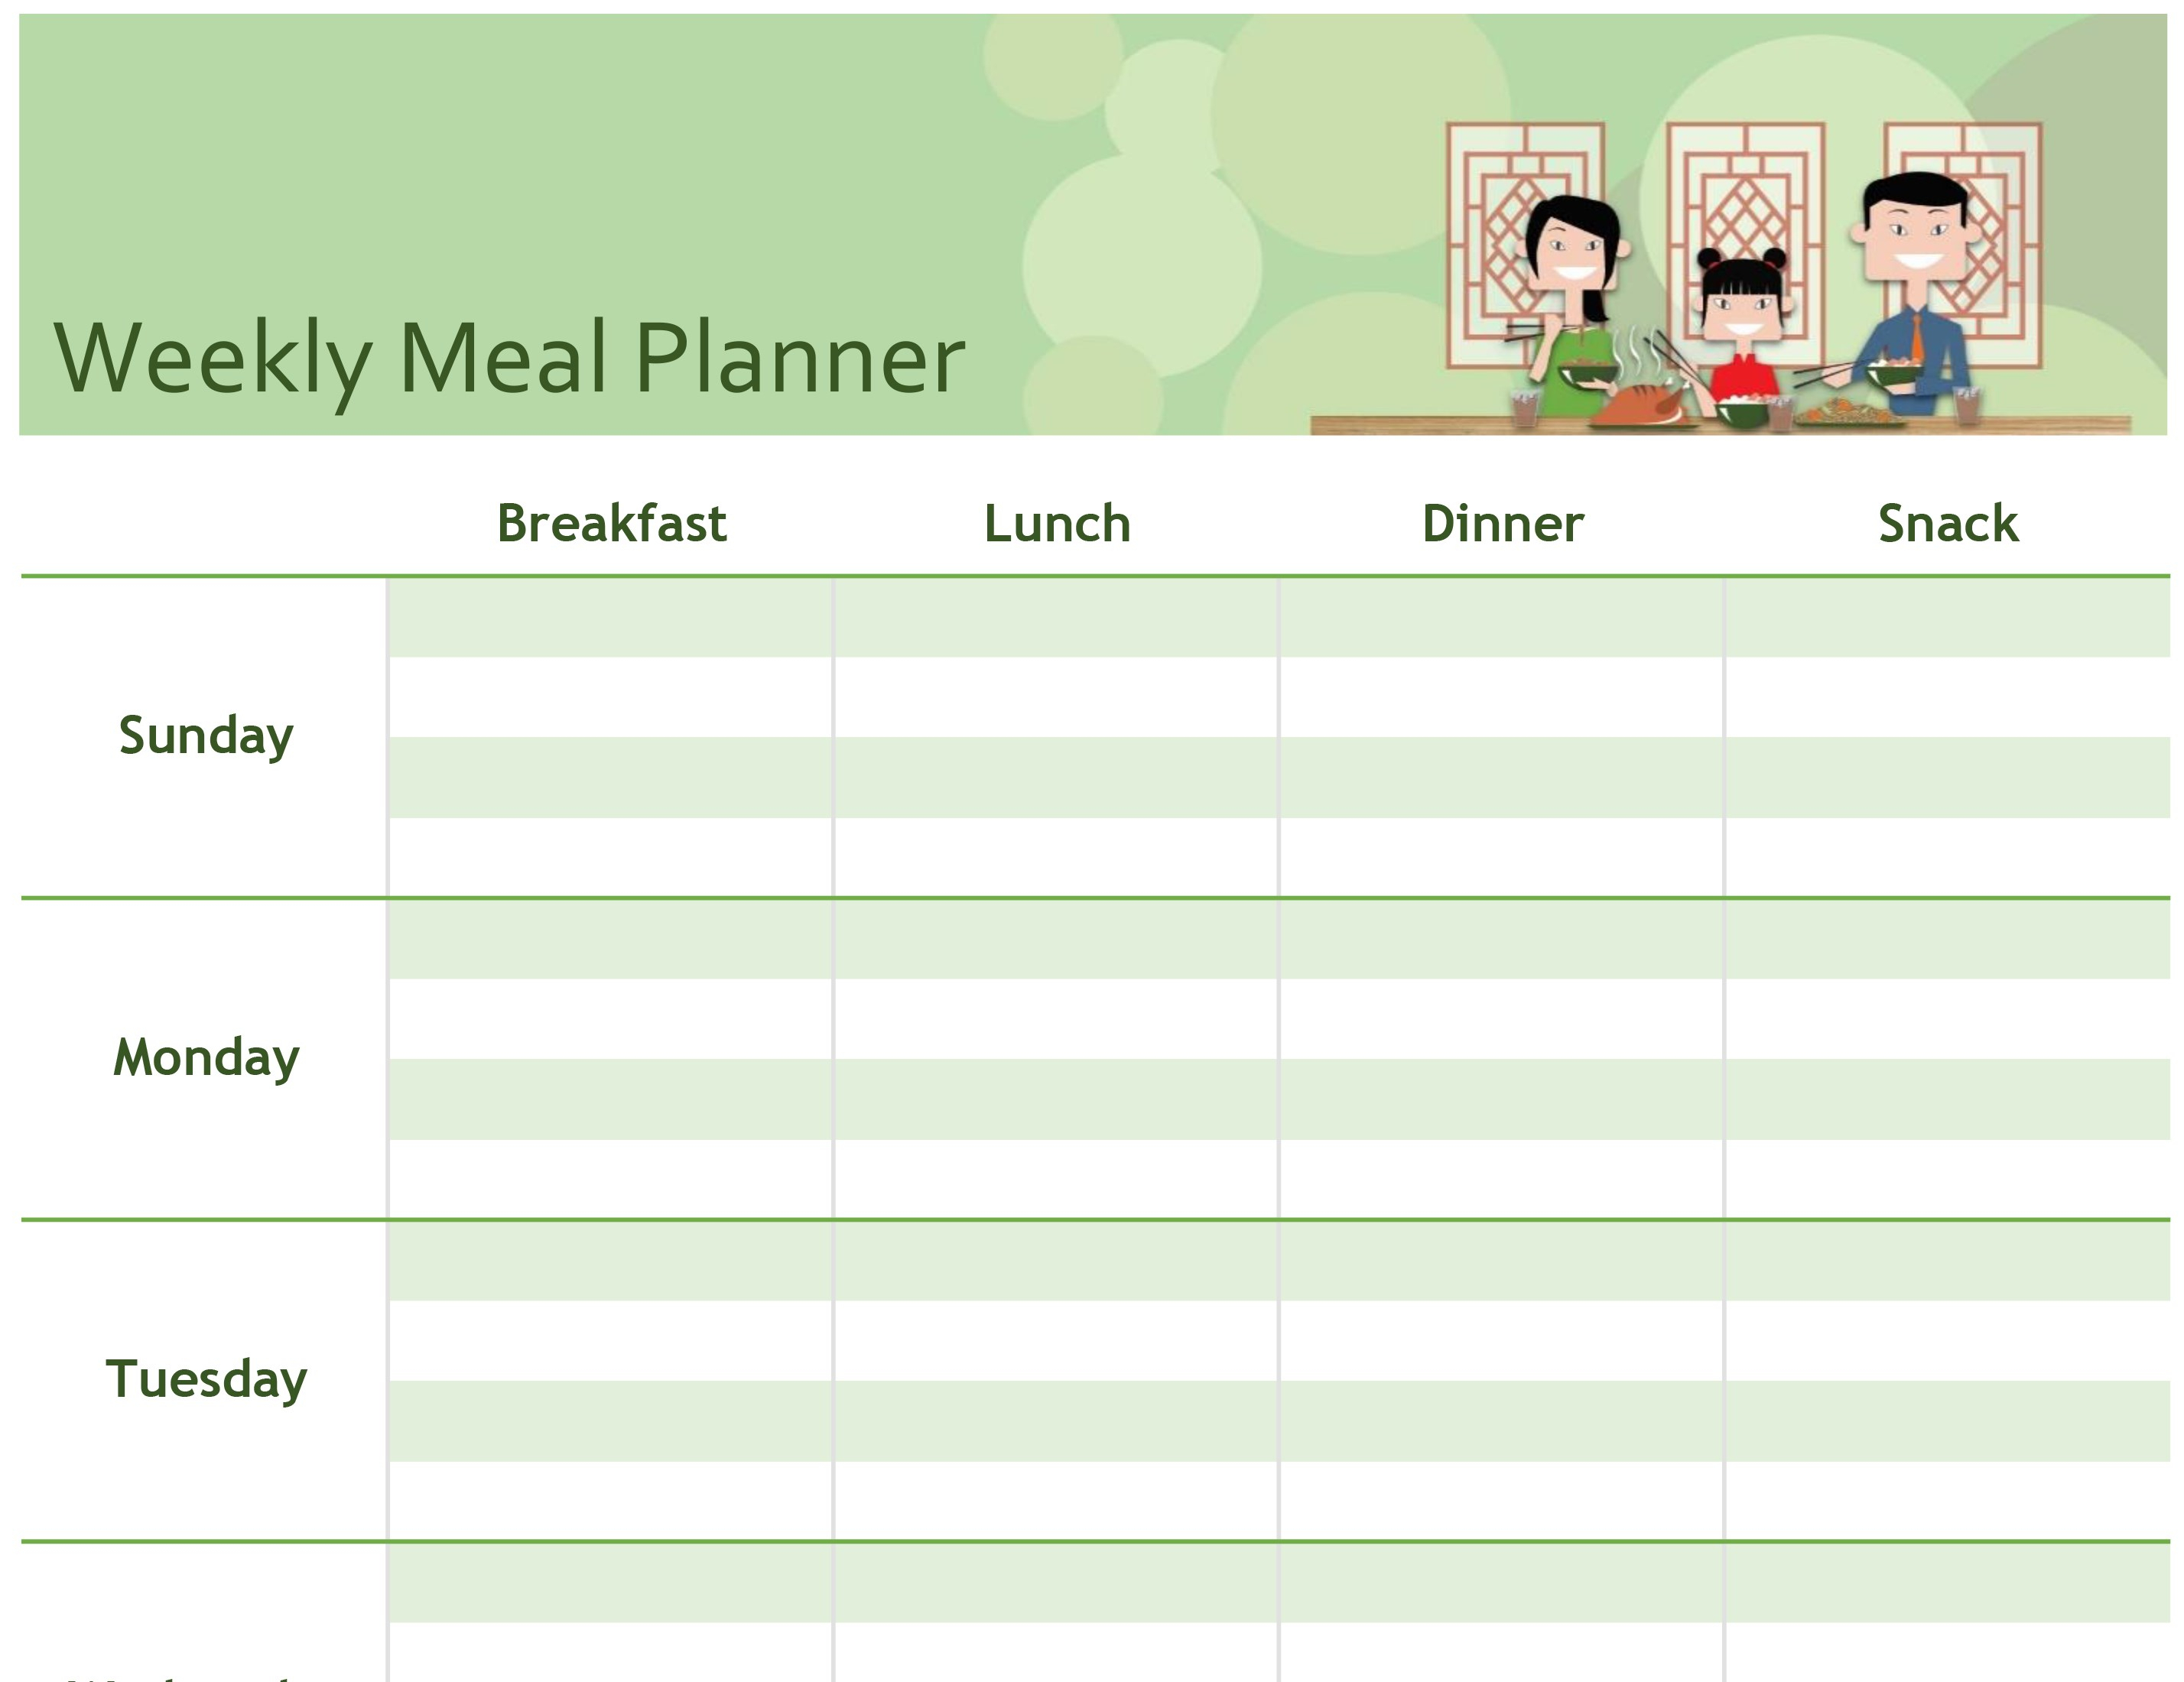 Menu Planning Template Word – Atlantaauctionco For Weekly Meal Planner Template Word